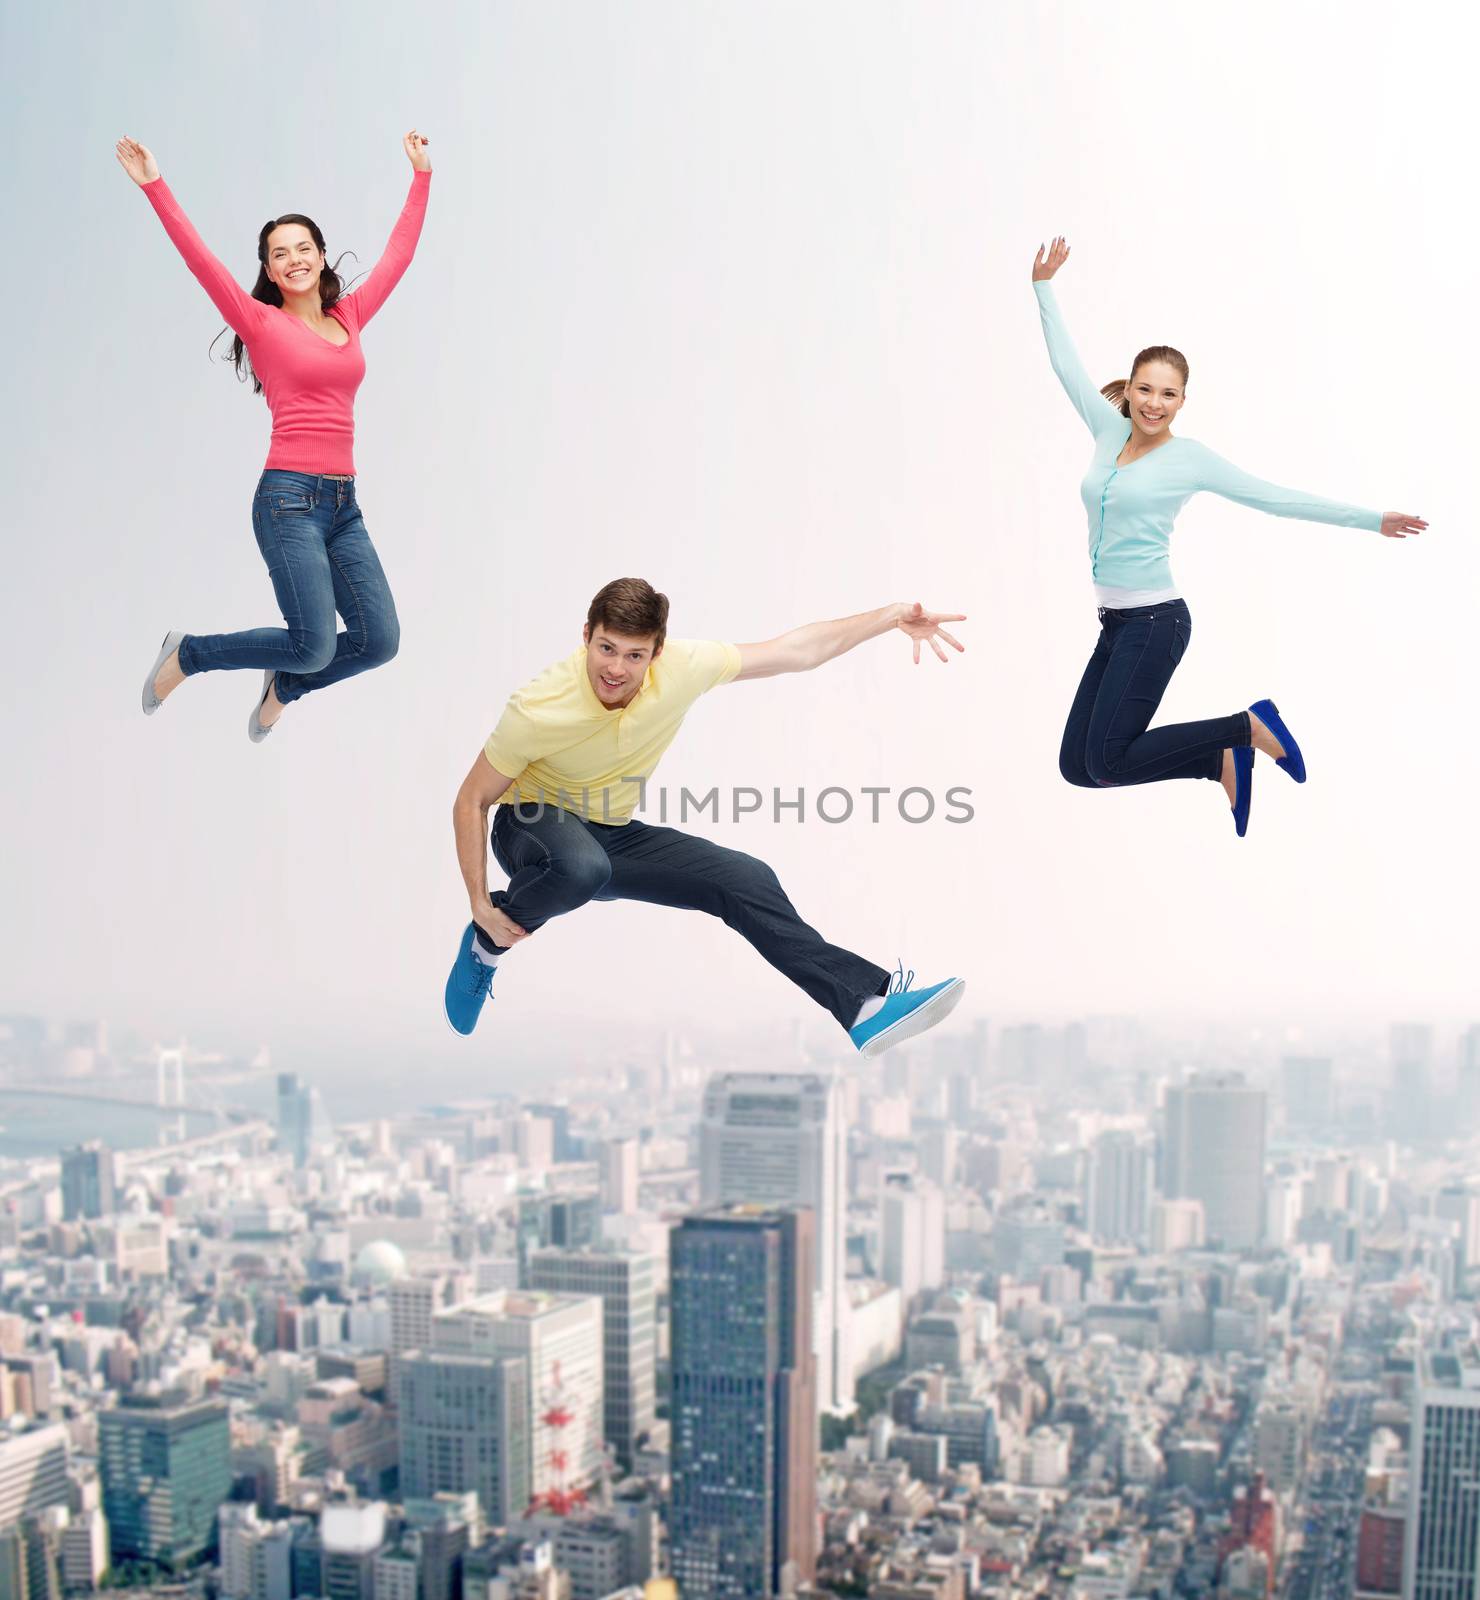 happiness, freedom, friendship, movement and people concept - group of smiling teenagers jumping in air over city background